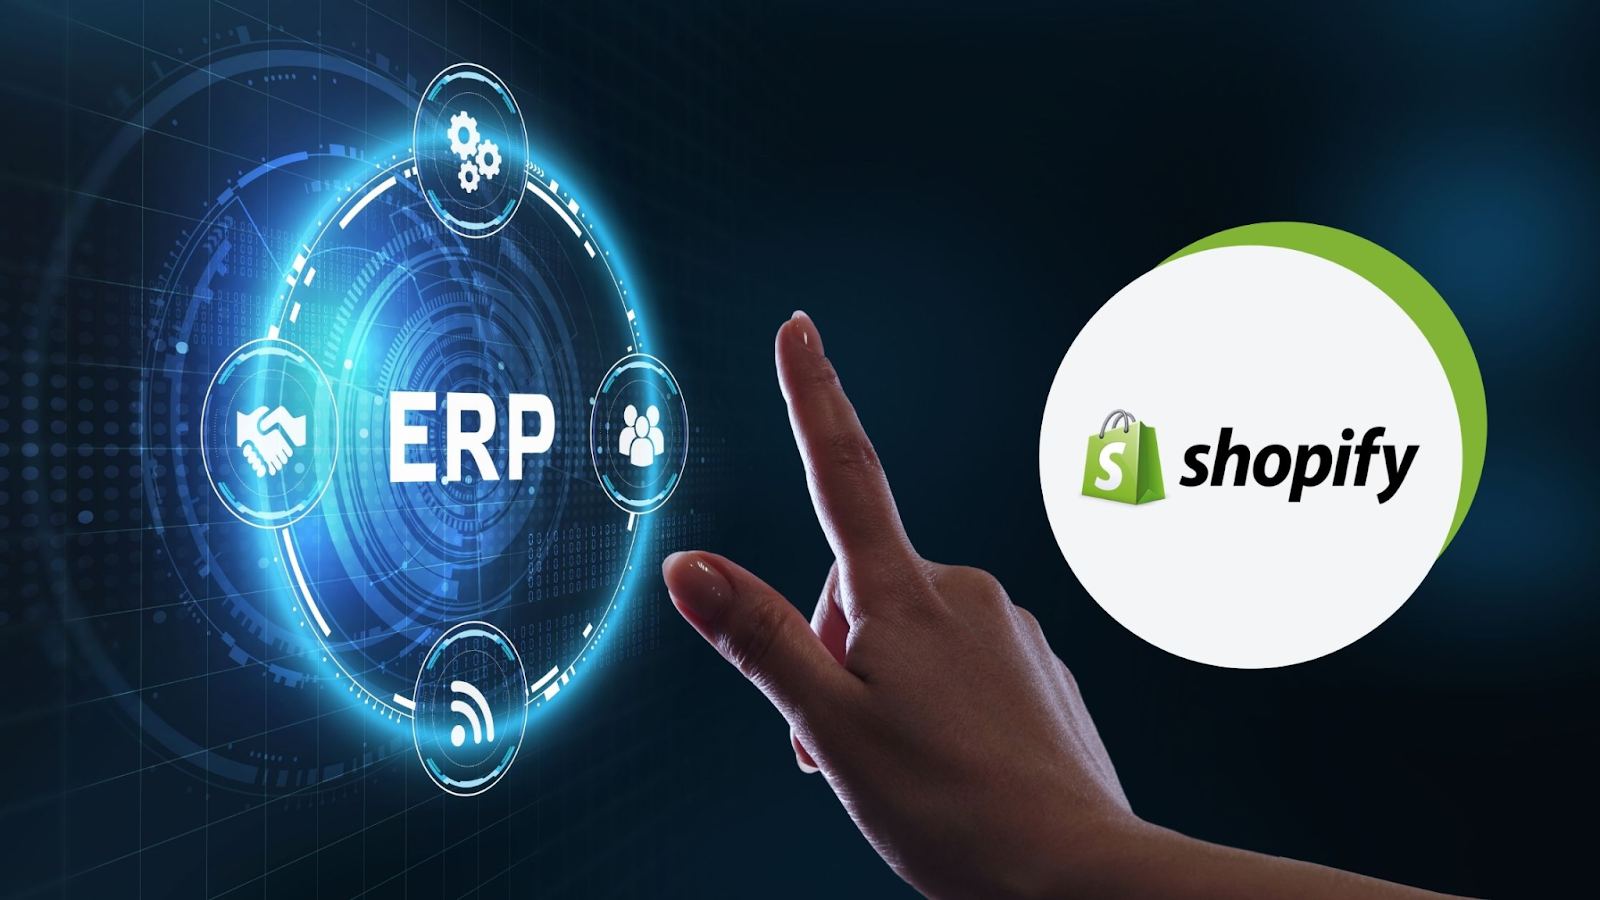 The role of ERP for your Shopify store